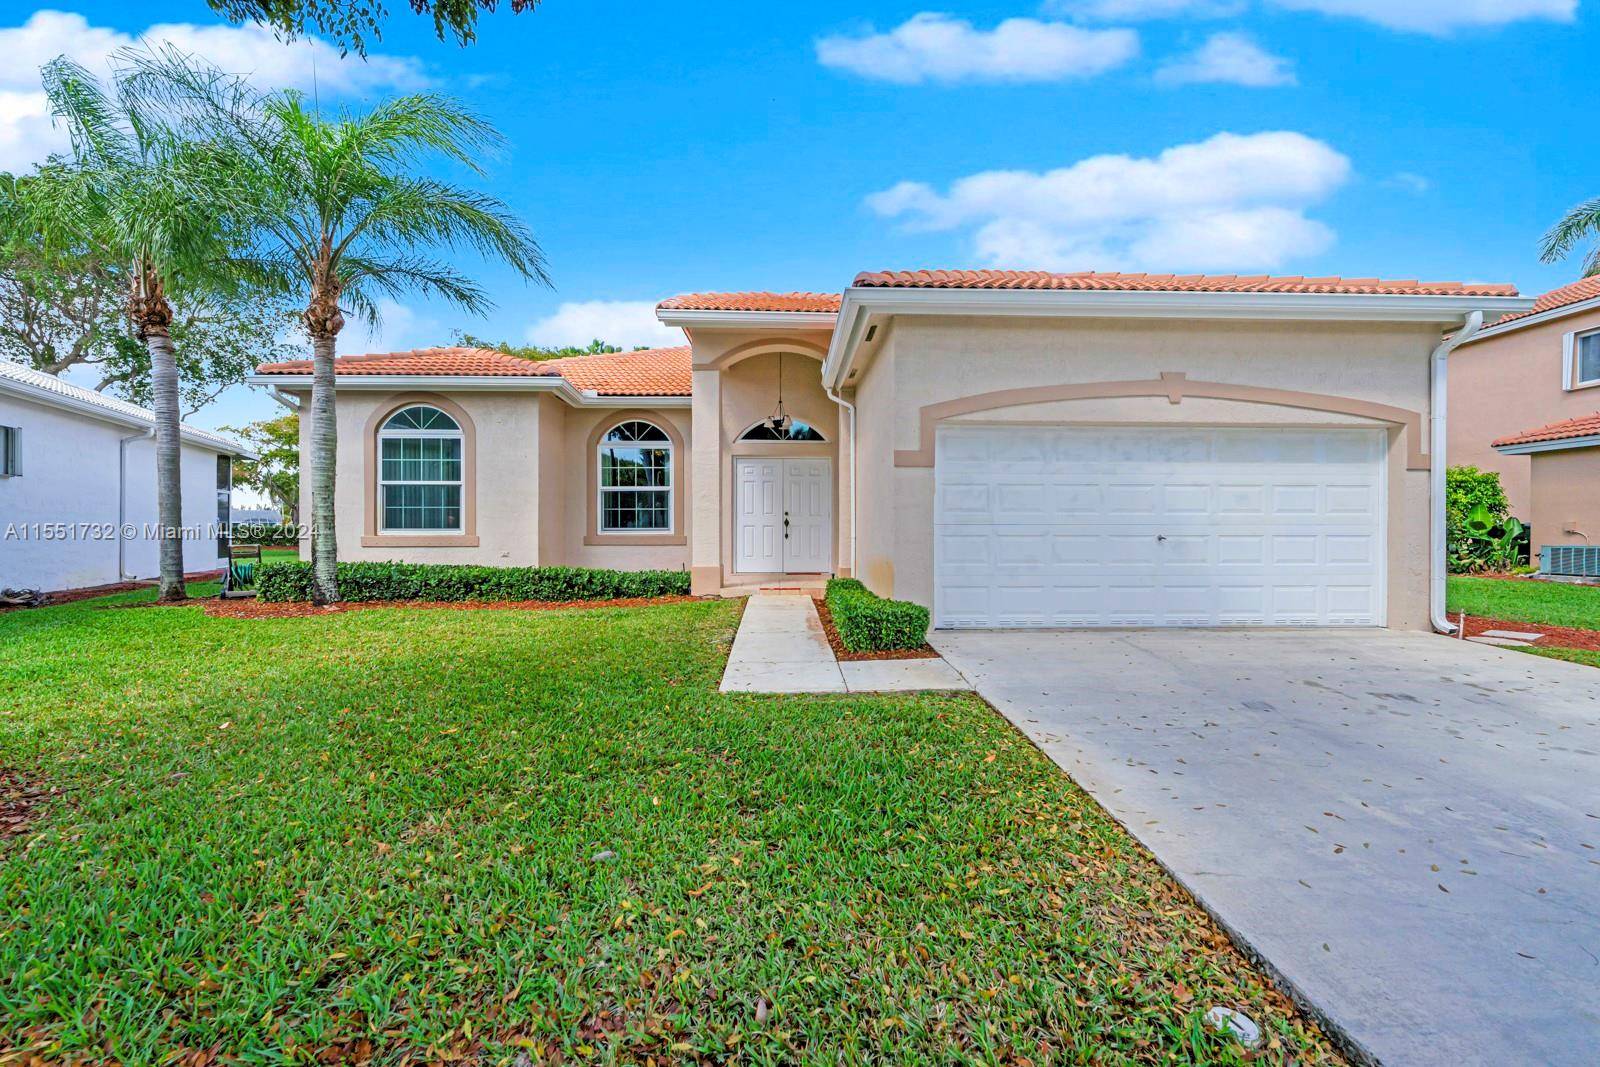 Move in ready 3 bedroom 2 bathroom one story single family home located in North Gate a Keys Gate community.